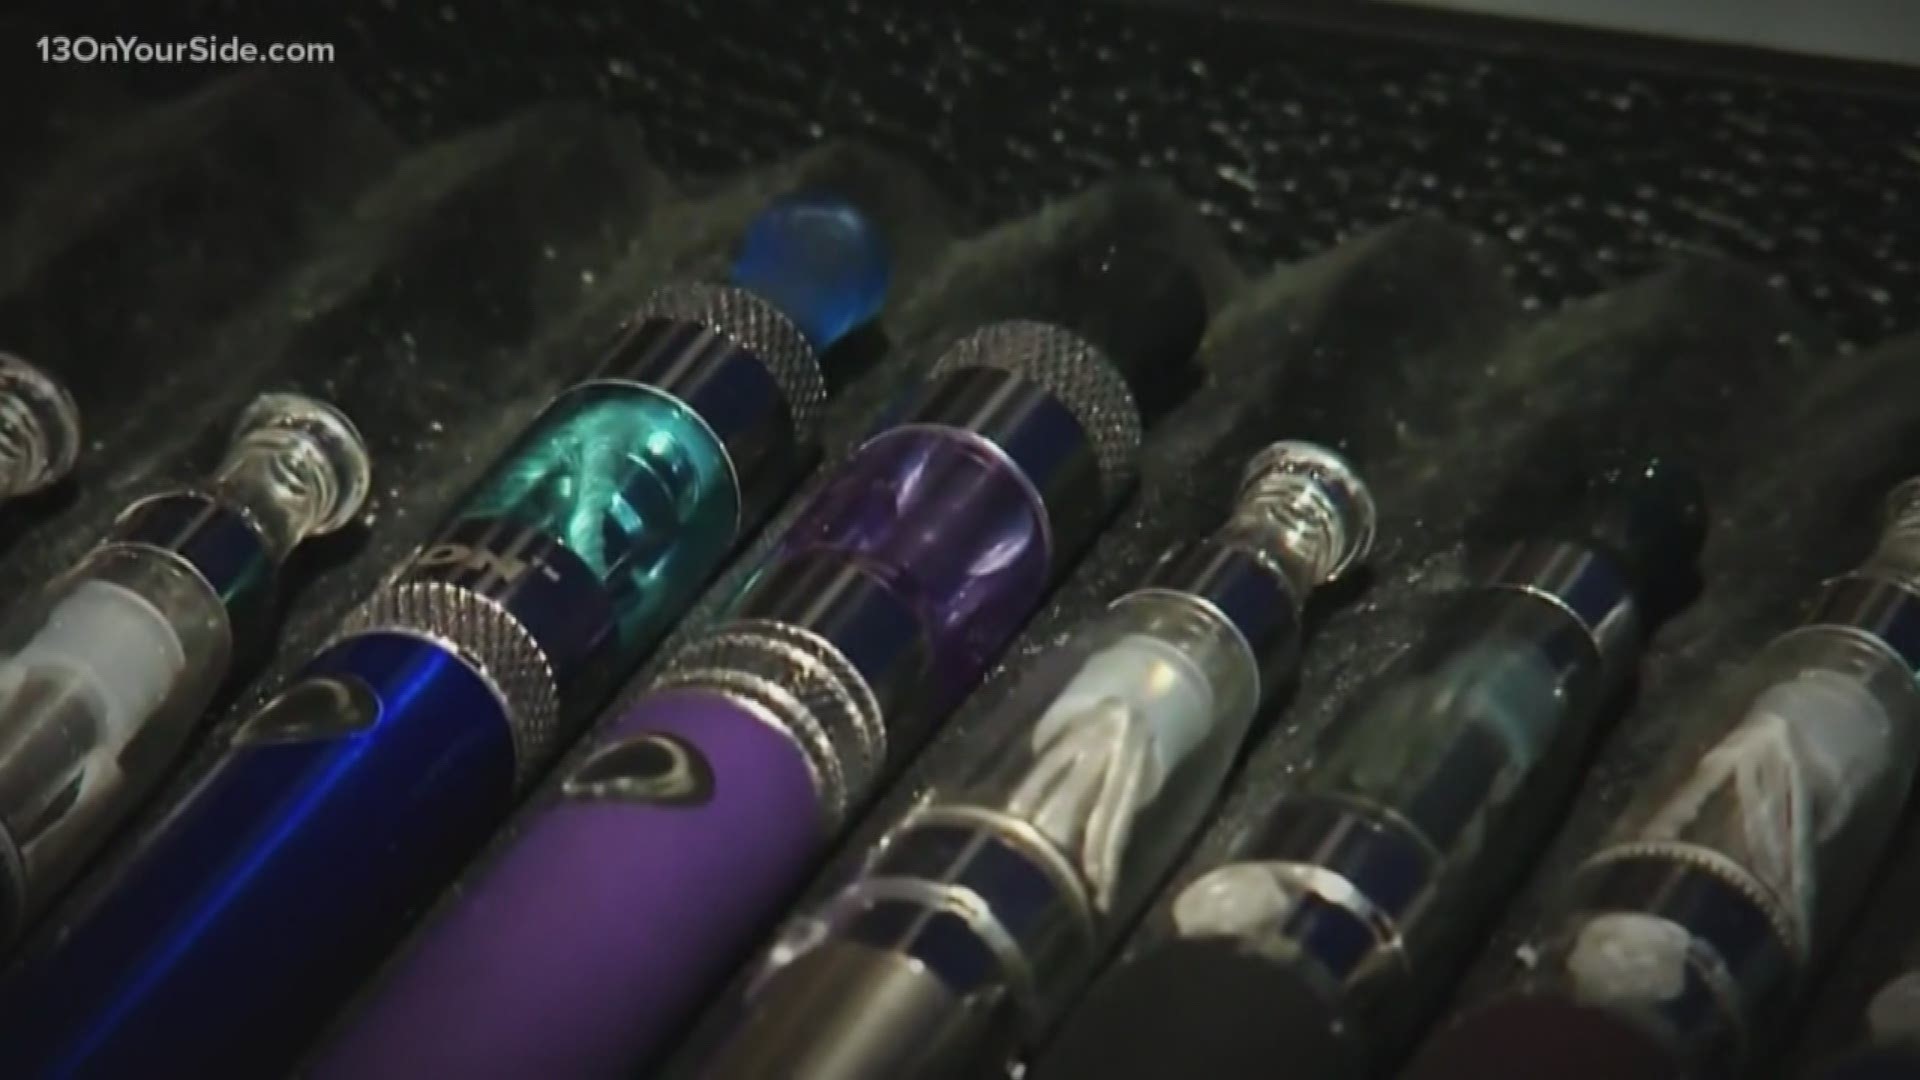 Republican lawmakers introduced a House bill on Thursday that would eliminate this week’s ban on flavored e-cigarettes, with one calling the ban “stupid policy.’’